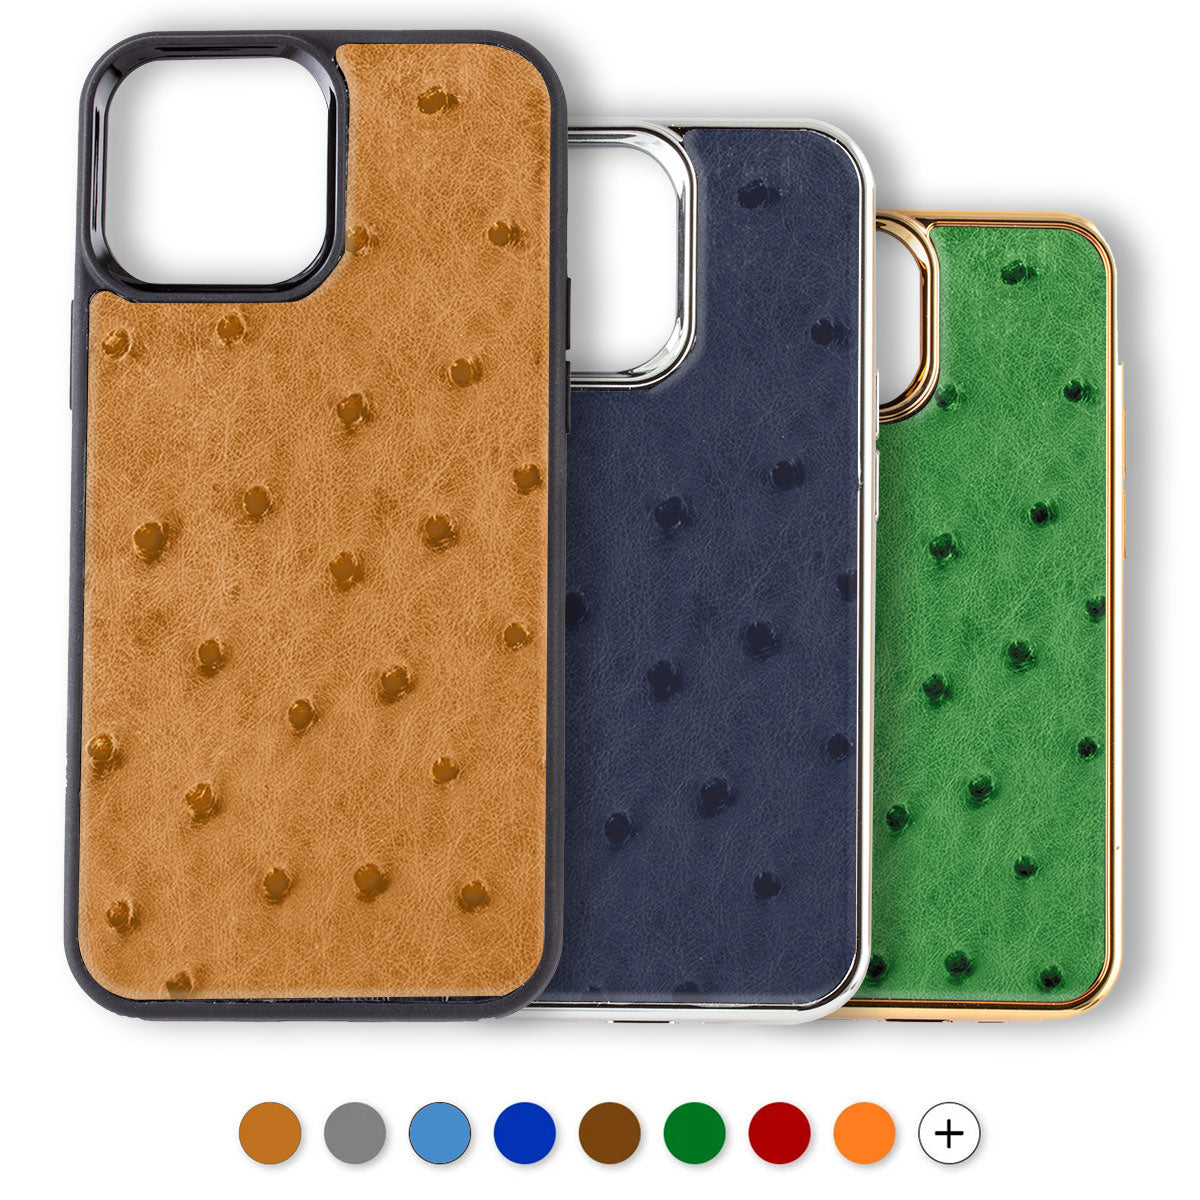  iPhone "Sport case" with leather cover - iPhone 13 ( Pro / Max / Mini ) - Genuine ostrich